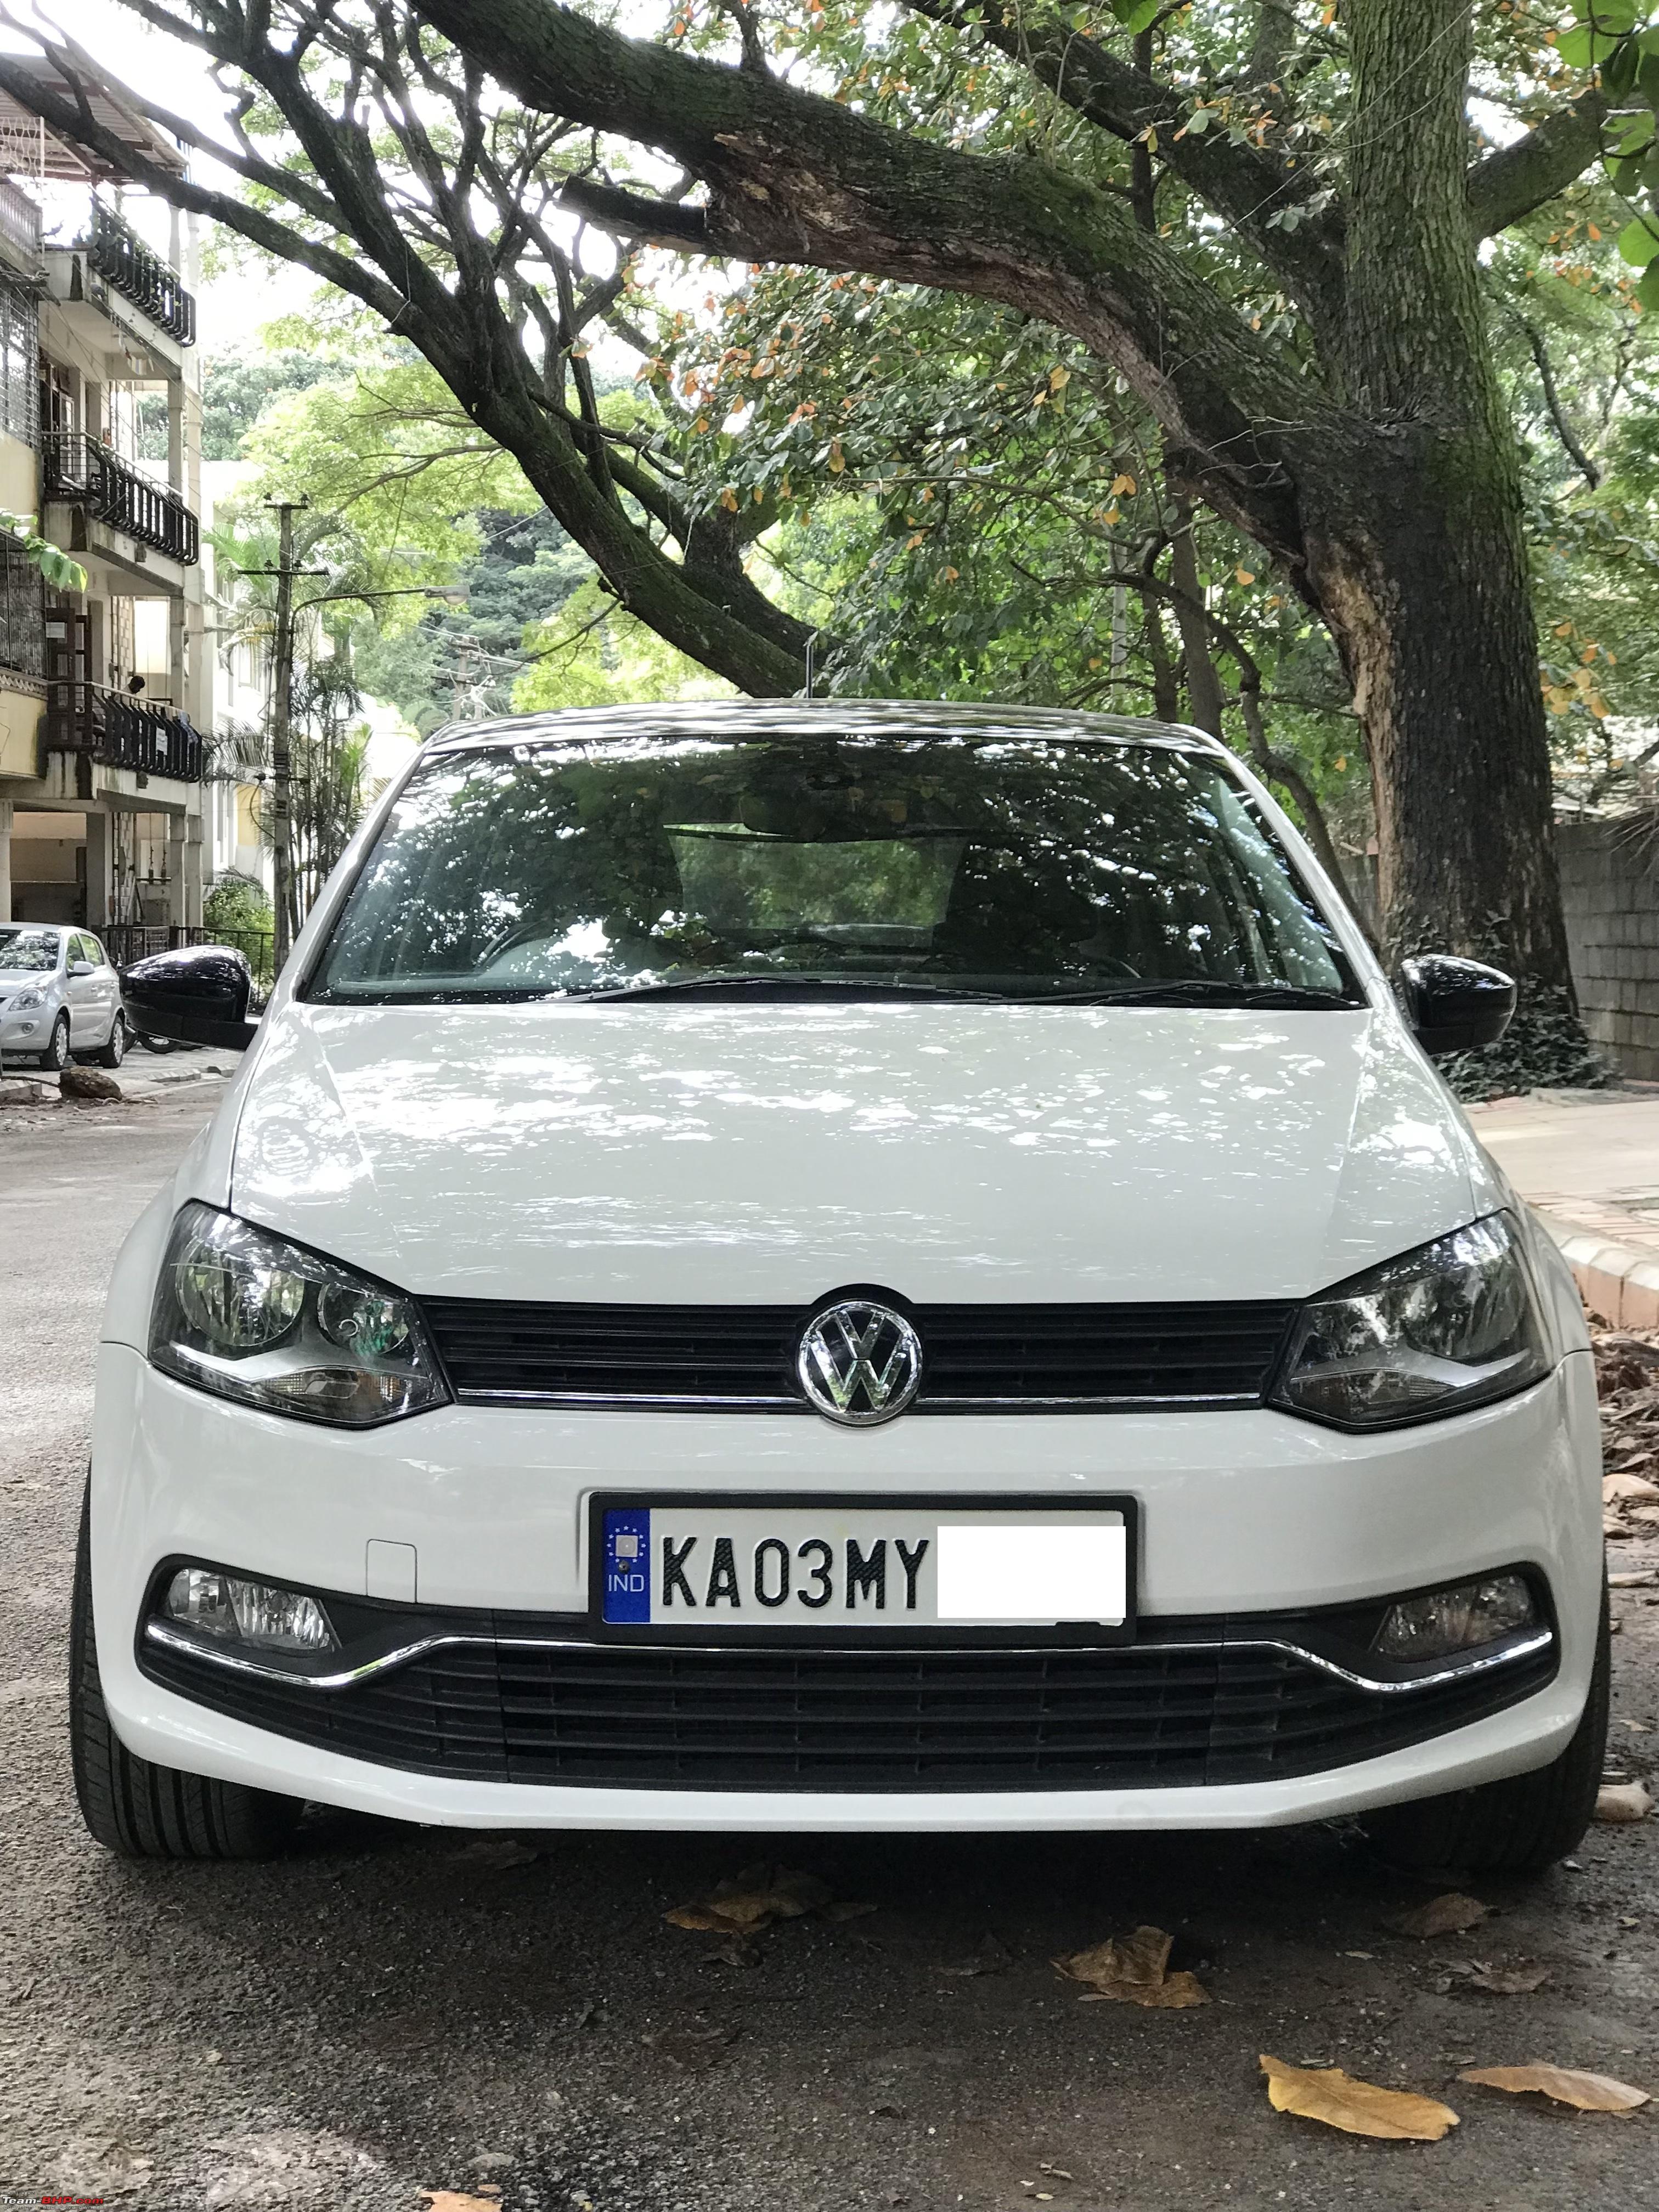 Volkswagen Polo 1.2L GT TSI : Official Review - Page 455 - Team-BHP